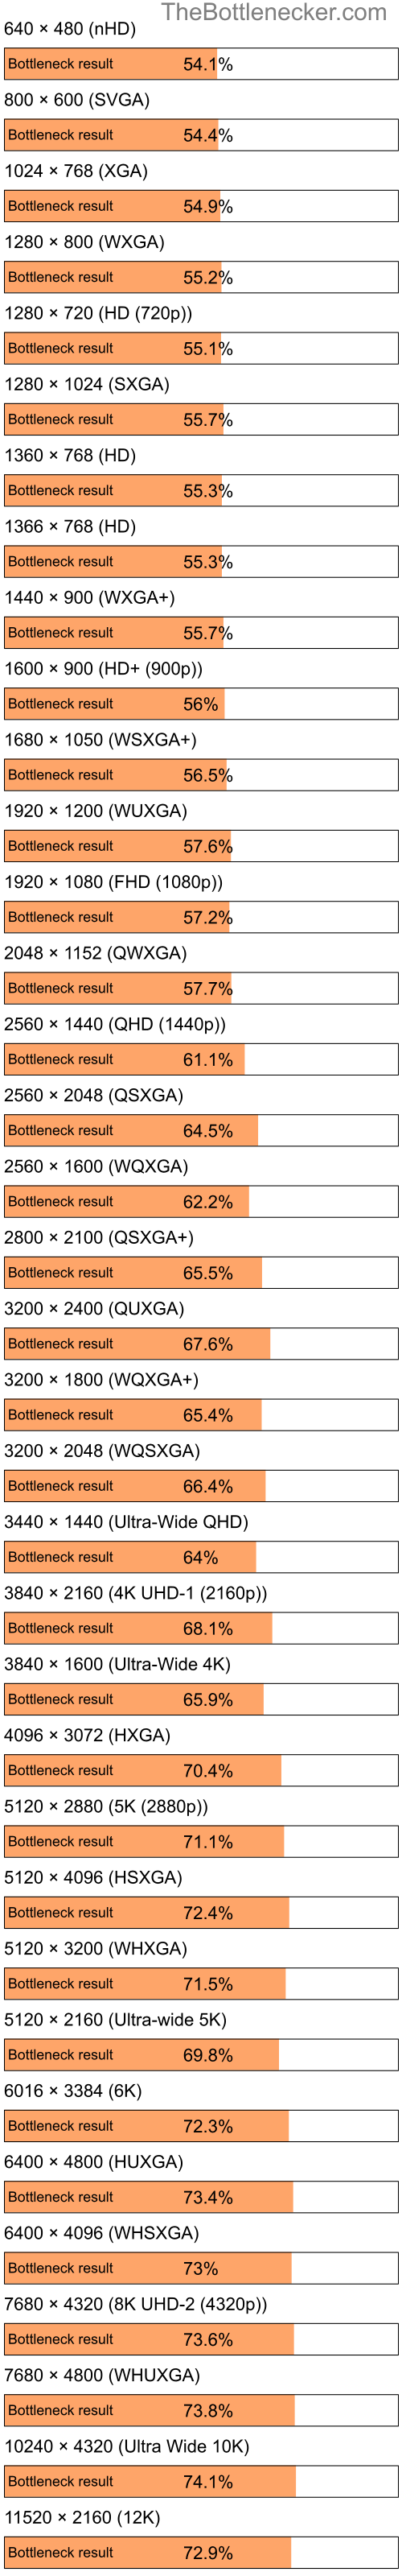 Bottleneck results by resolution for Intel Pentium 4 and NVIDIA Quadro FX 570M in Processor Intense Tasks